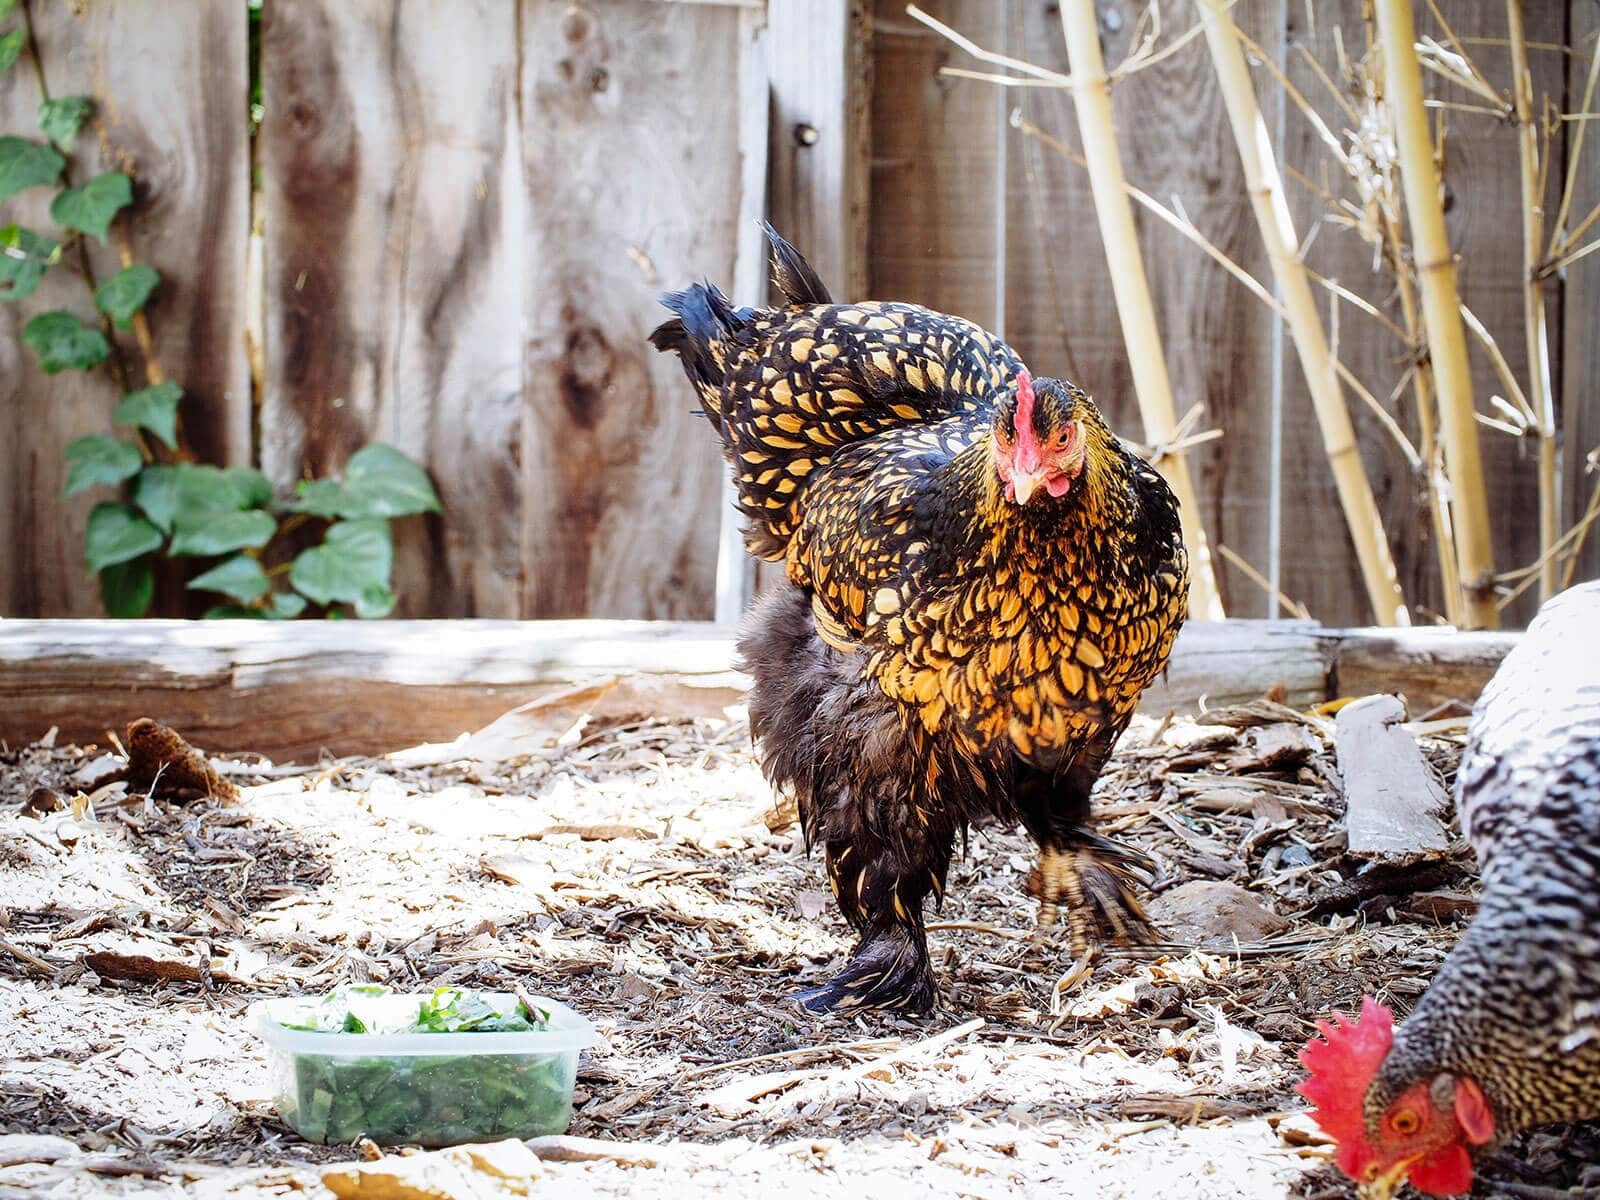 Allow a broody chicken to air dry her feathers after a cold bath